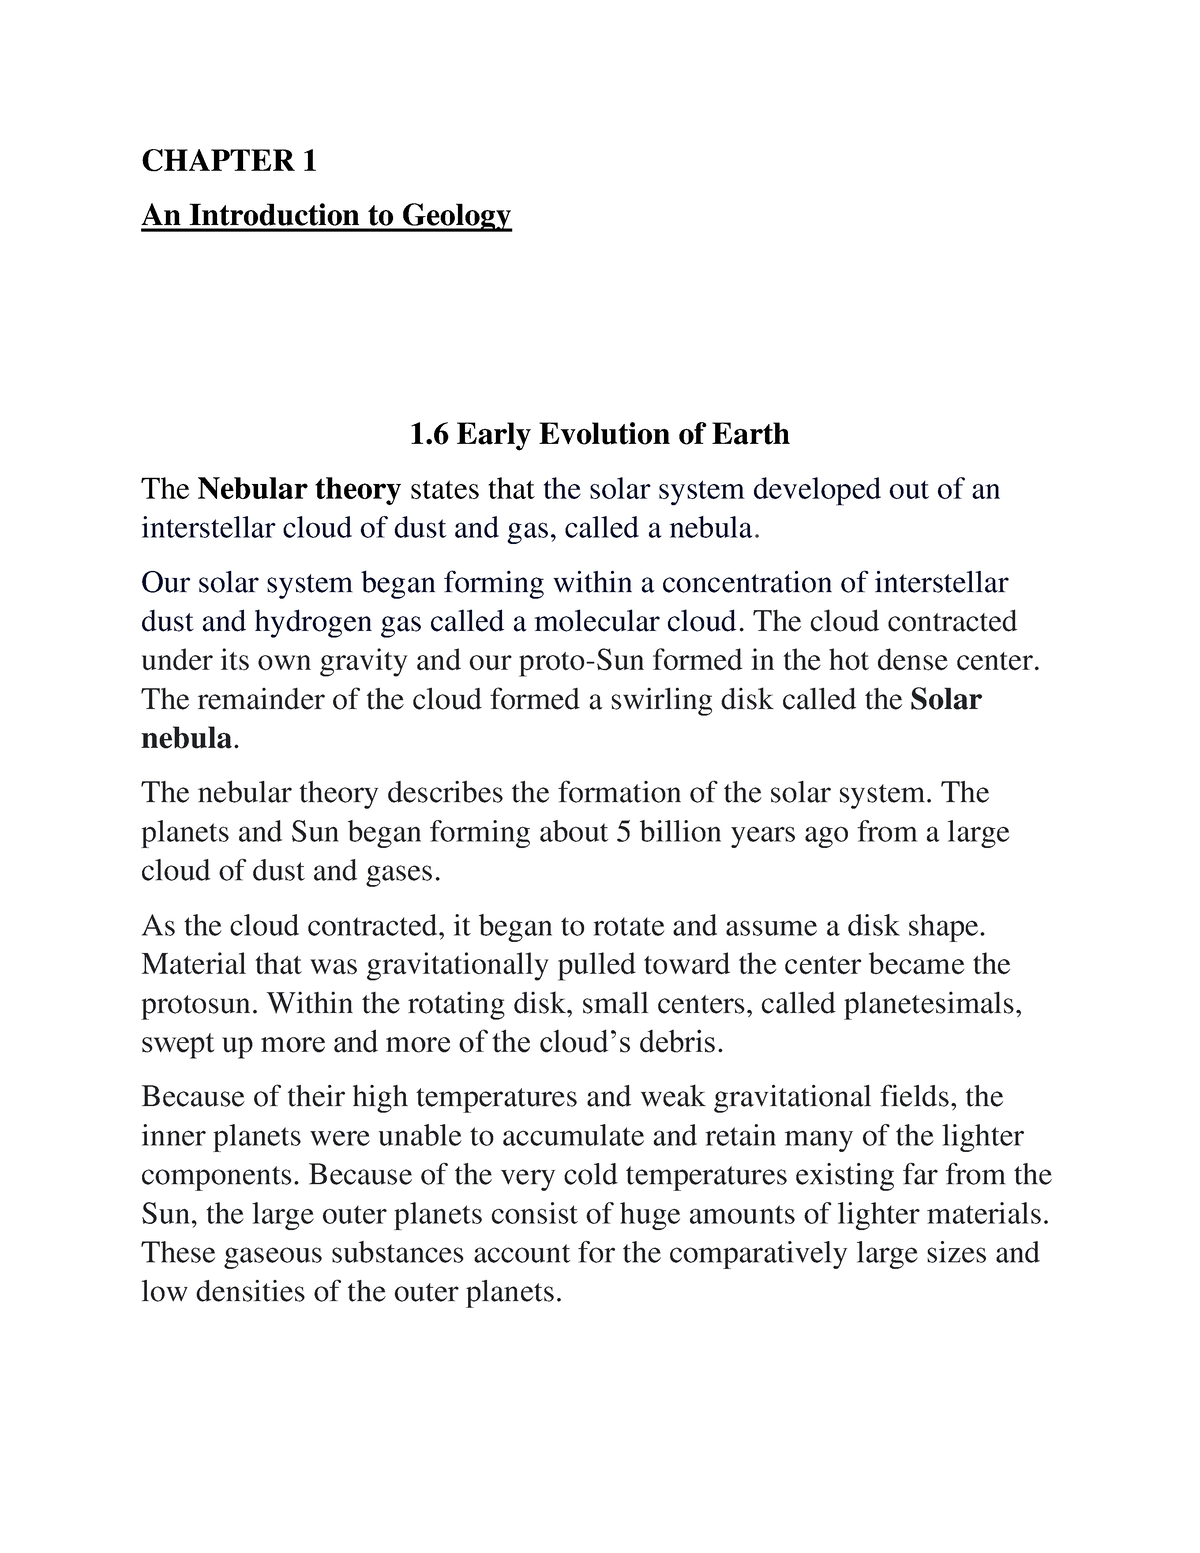 introduction to geology essay